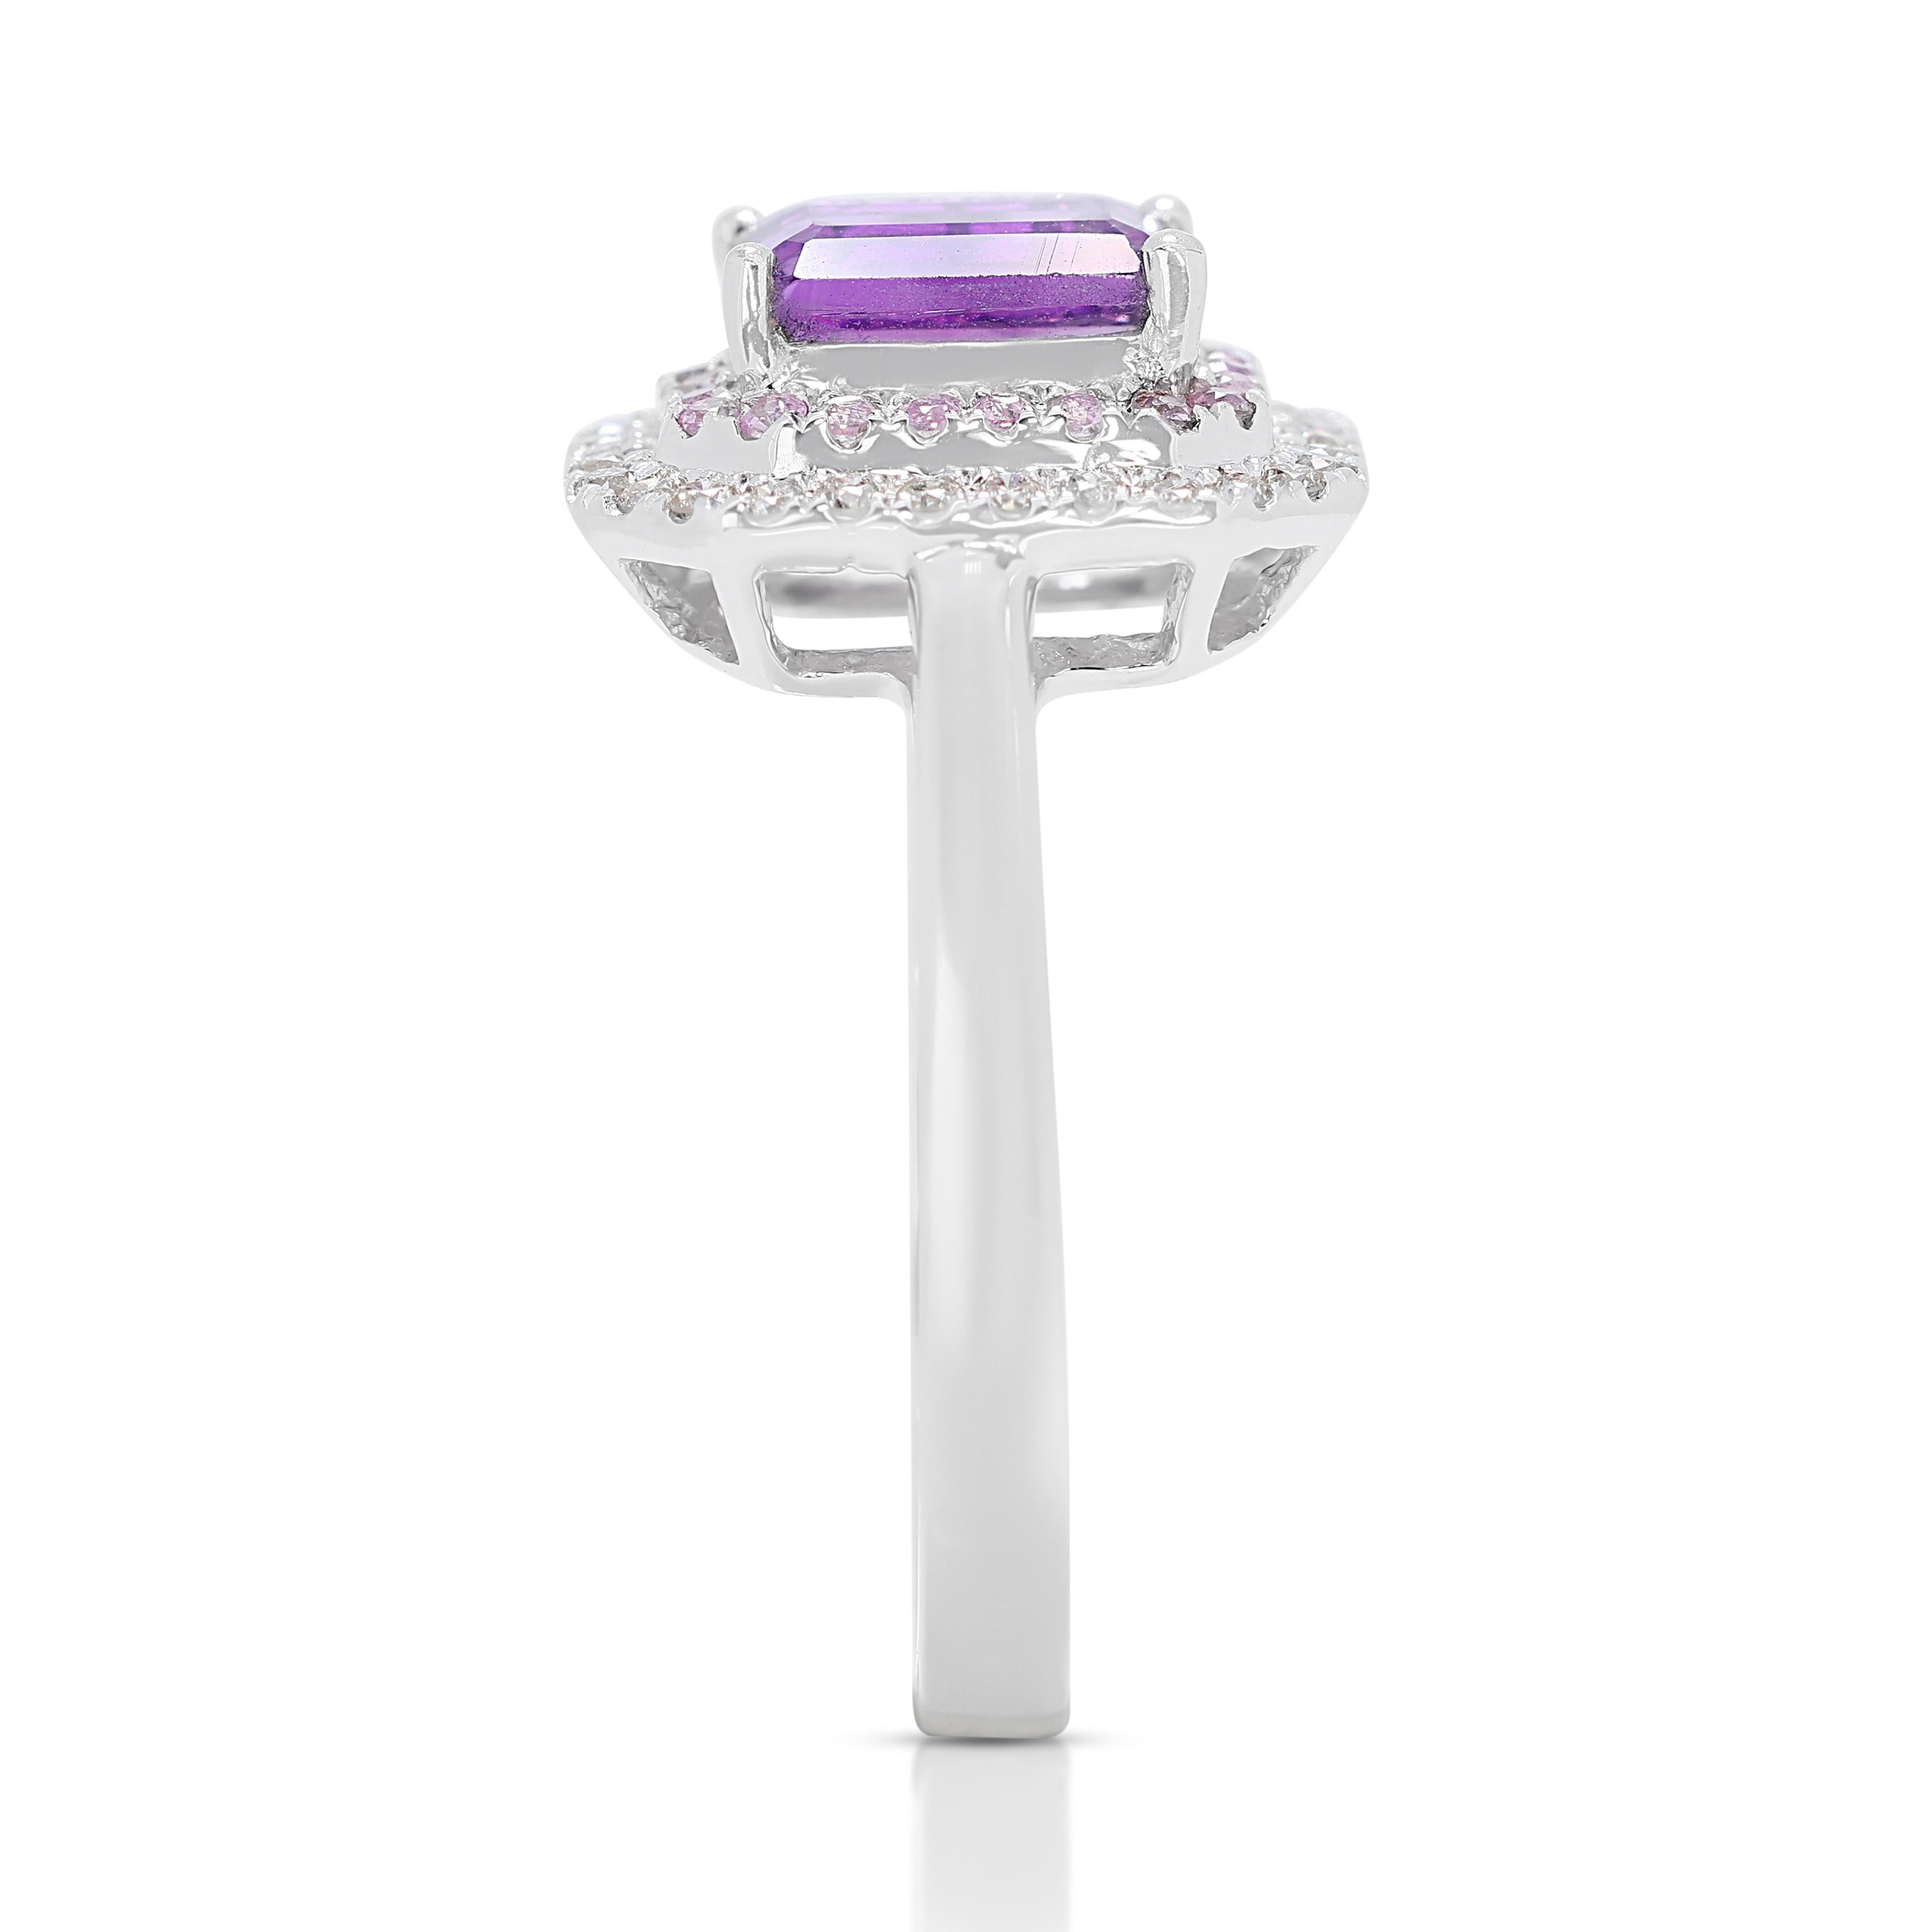 Women's Stunning 1.35ct Amethyst Double Halo Ring with Gemstones and Diamonds